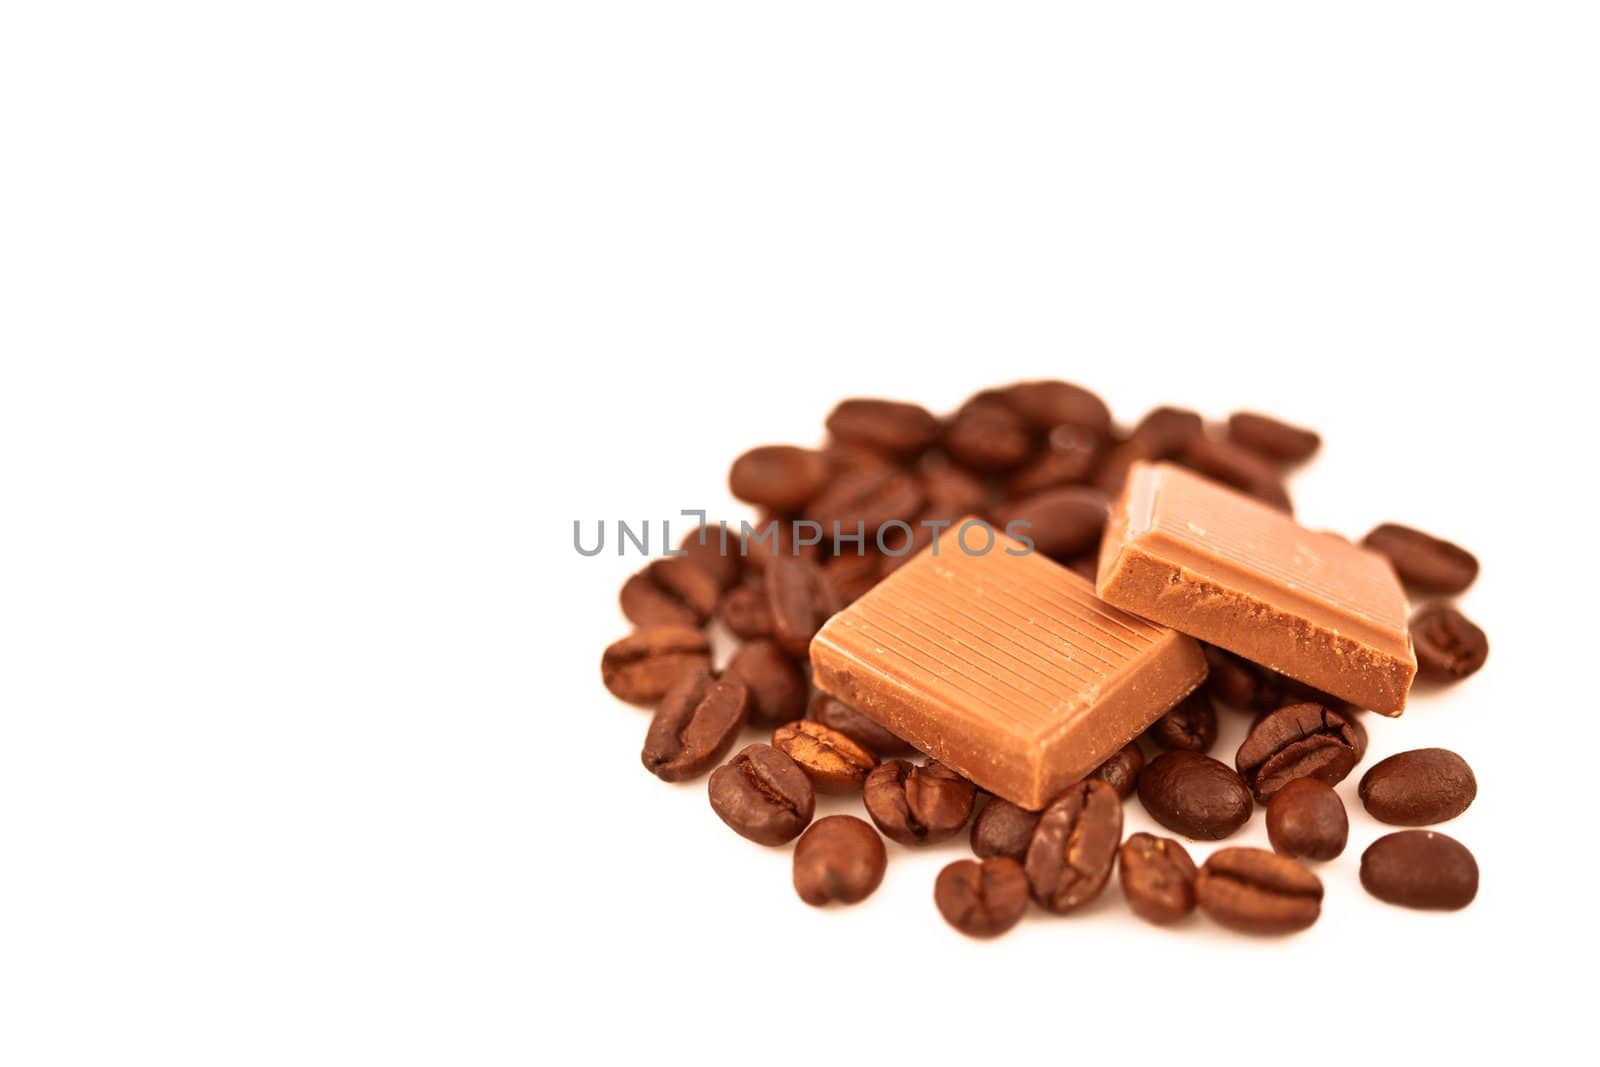 Two pieces of chocolate on coffee seeds by Wavebreakmedia